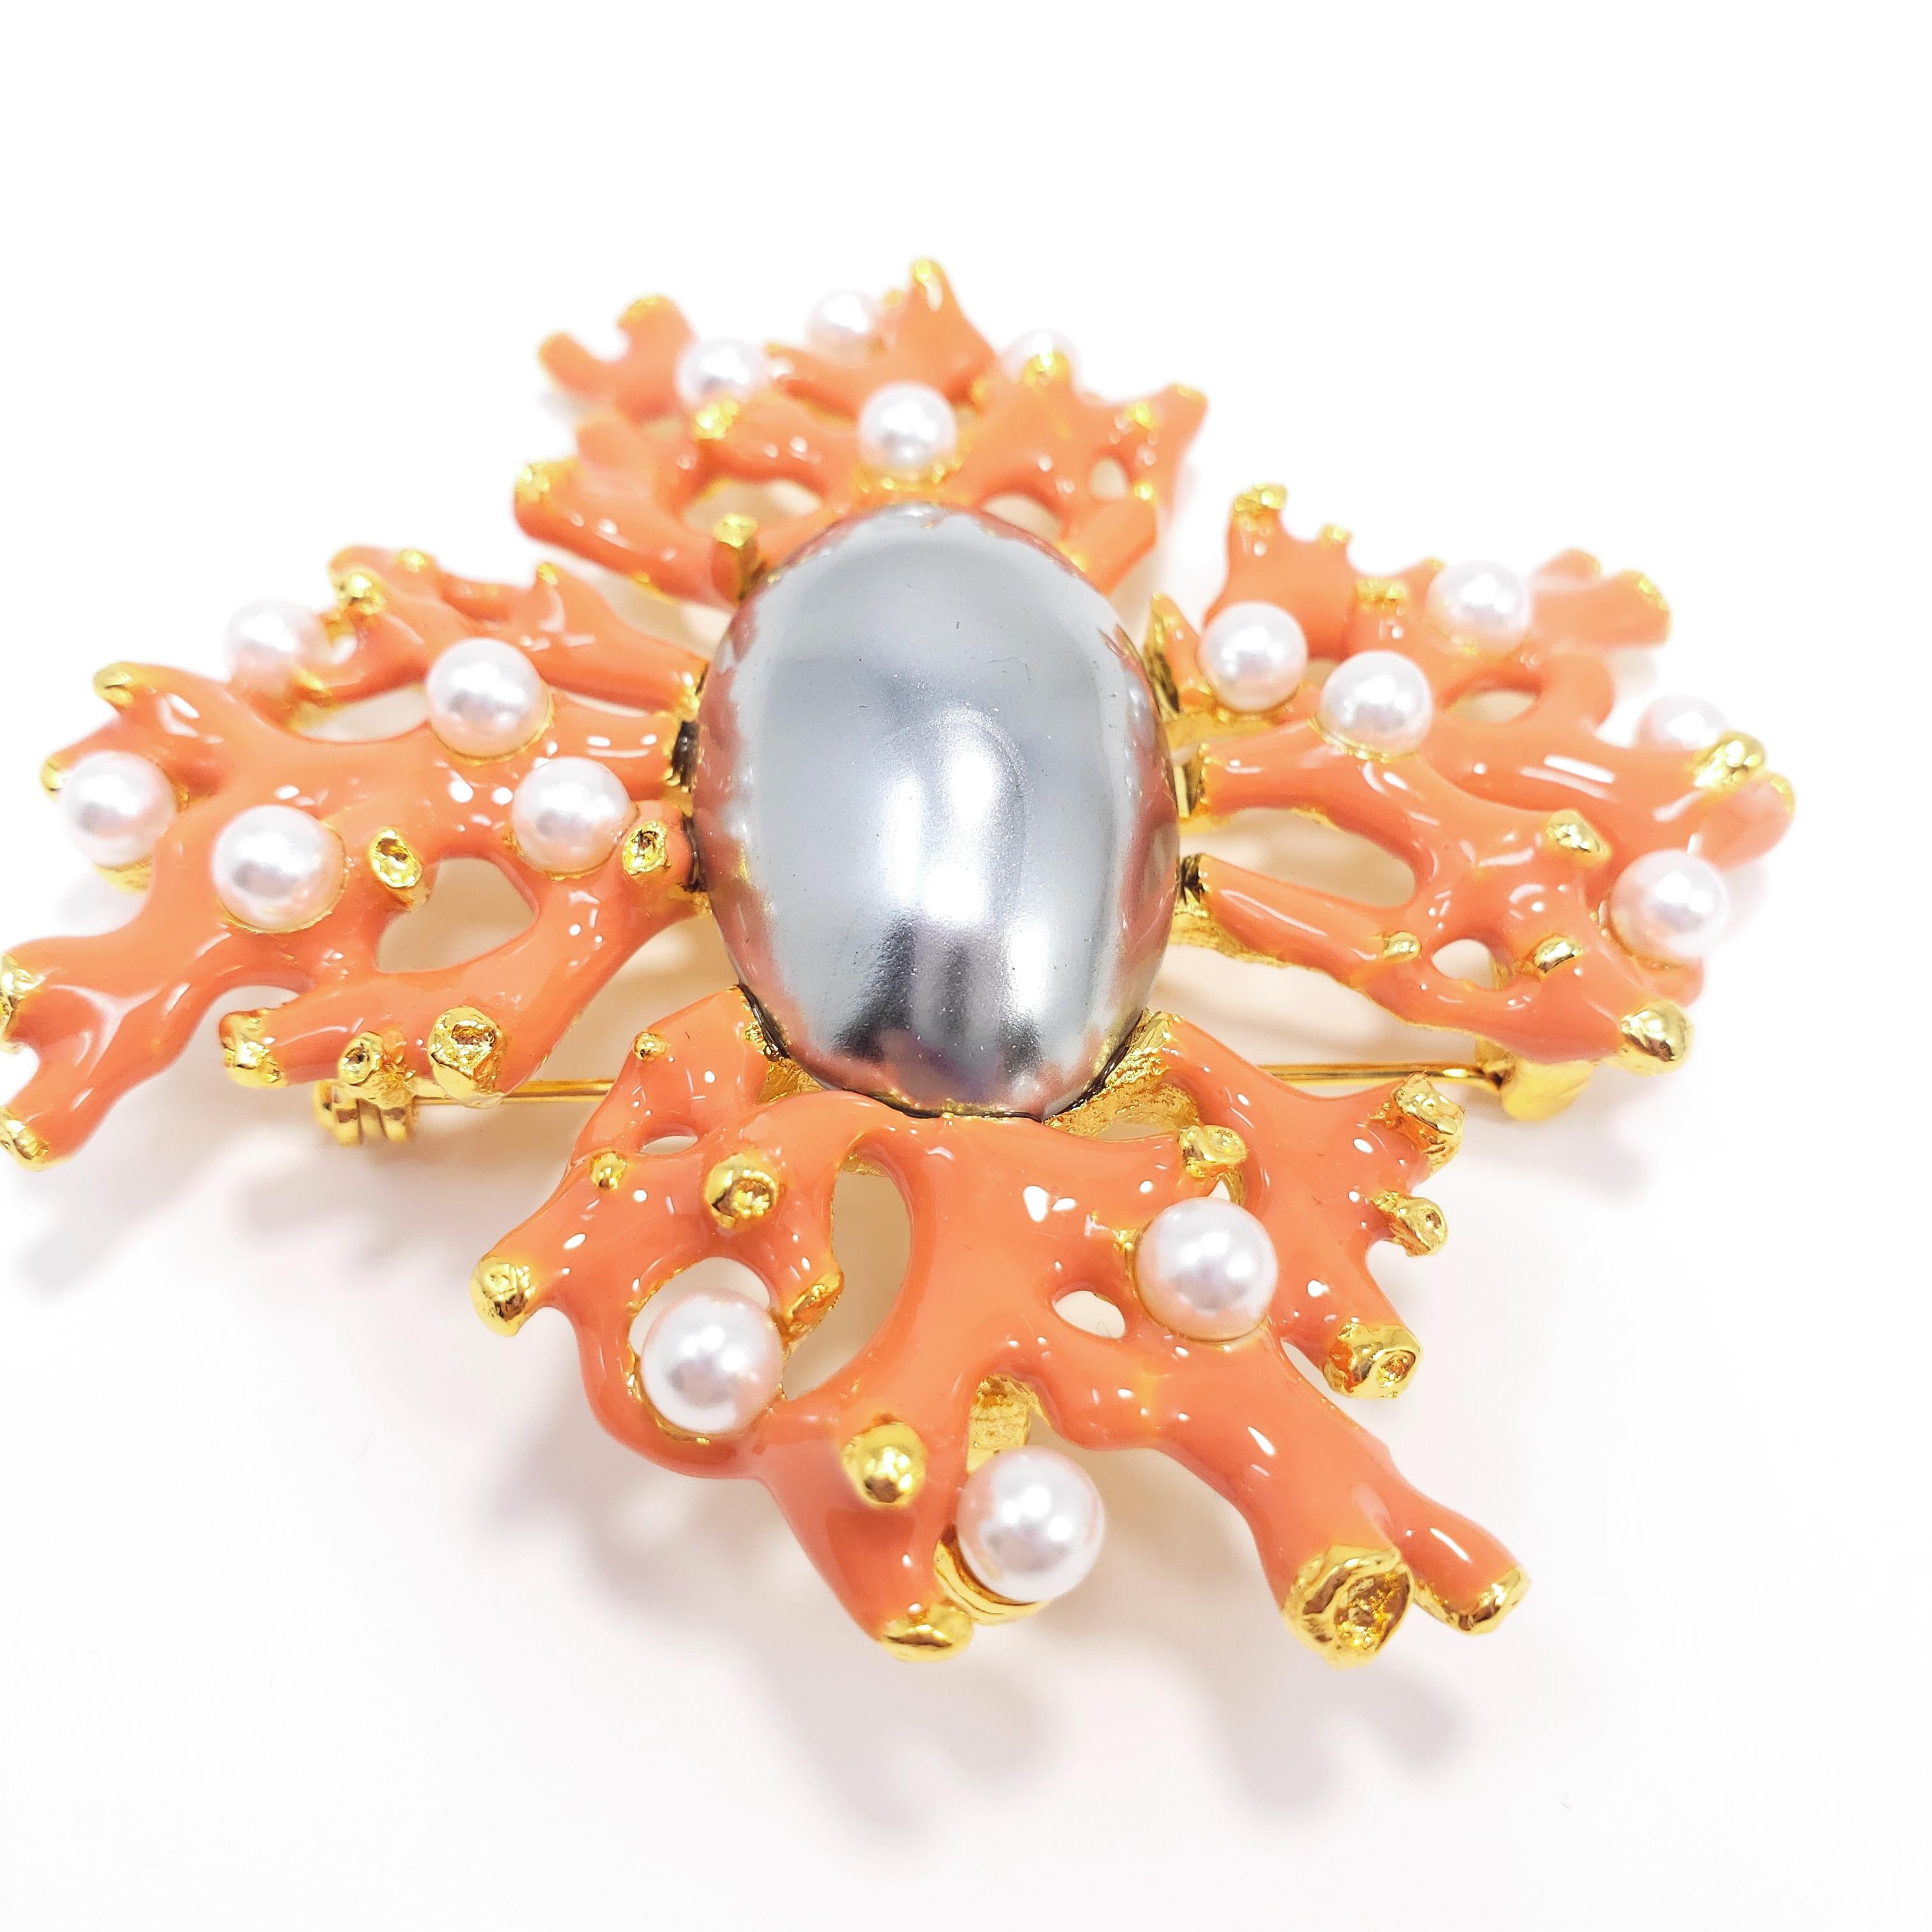 A unique nautical-themed pin/brooch that can also be worn as a pendant. Features coral-enameled branches accented with faux white pearls. An faux elongated gray pearl centerpiece sits in the center.

By Kenneth Jay Lane.

Hallmarks: Kenneth © Lane,